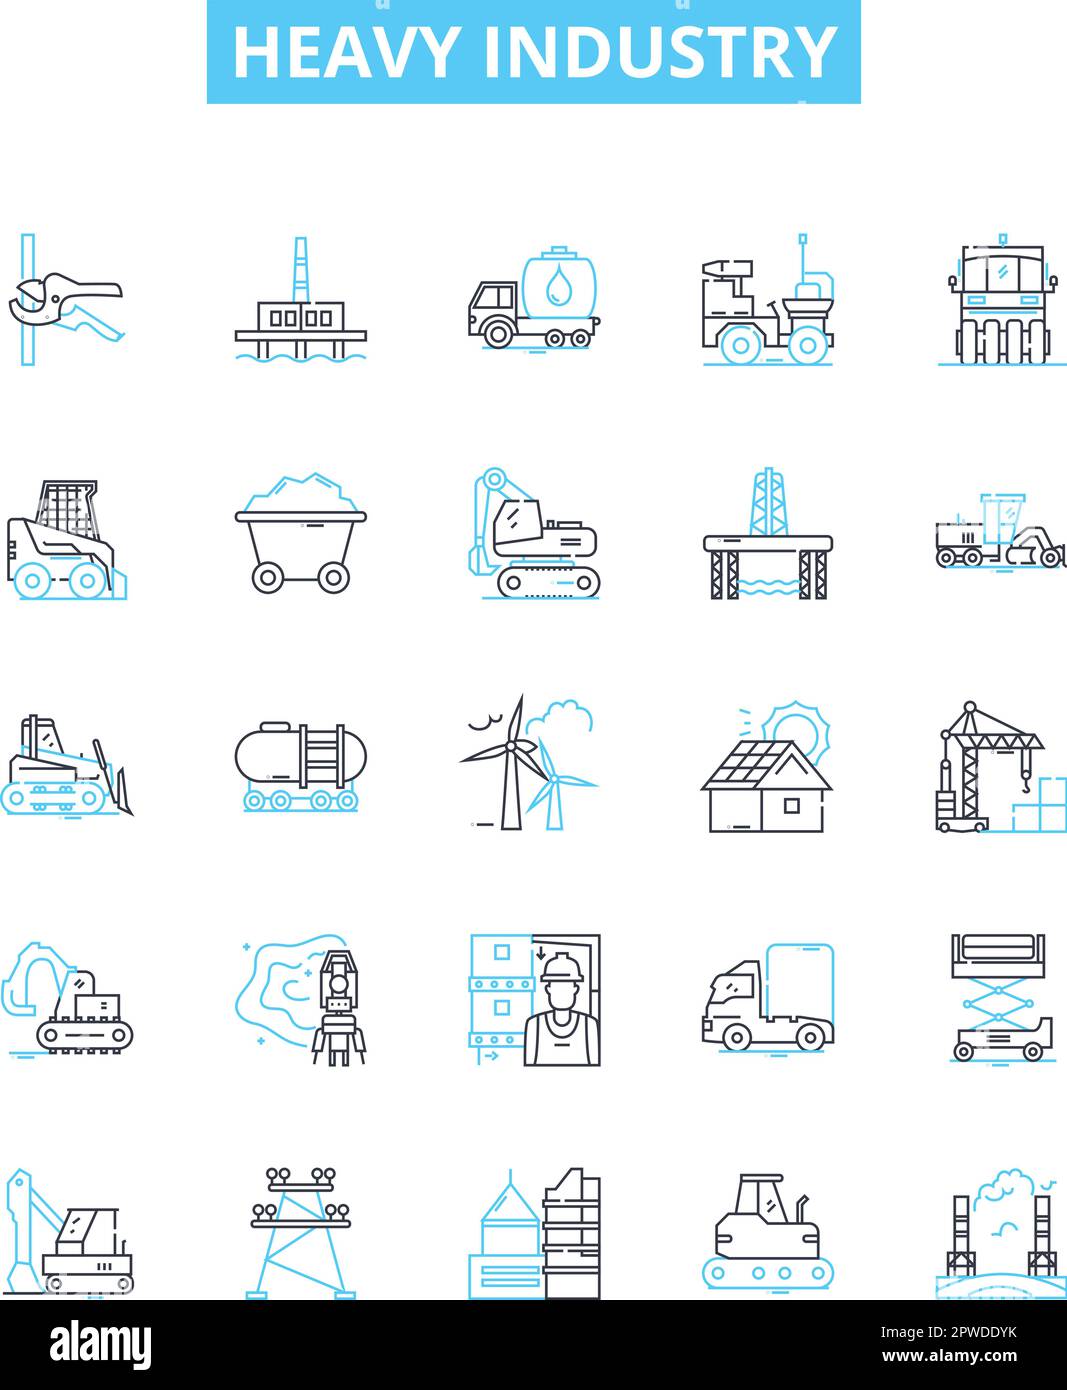 Heavy industry vector line icons set. manufacturing, smelting, mining, power, construction, engineering, steel illustration outline concept symbols Stock Vector